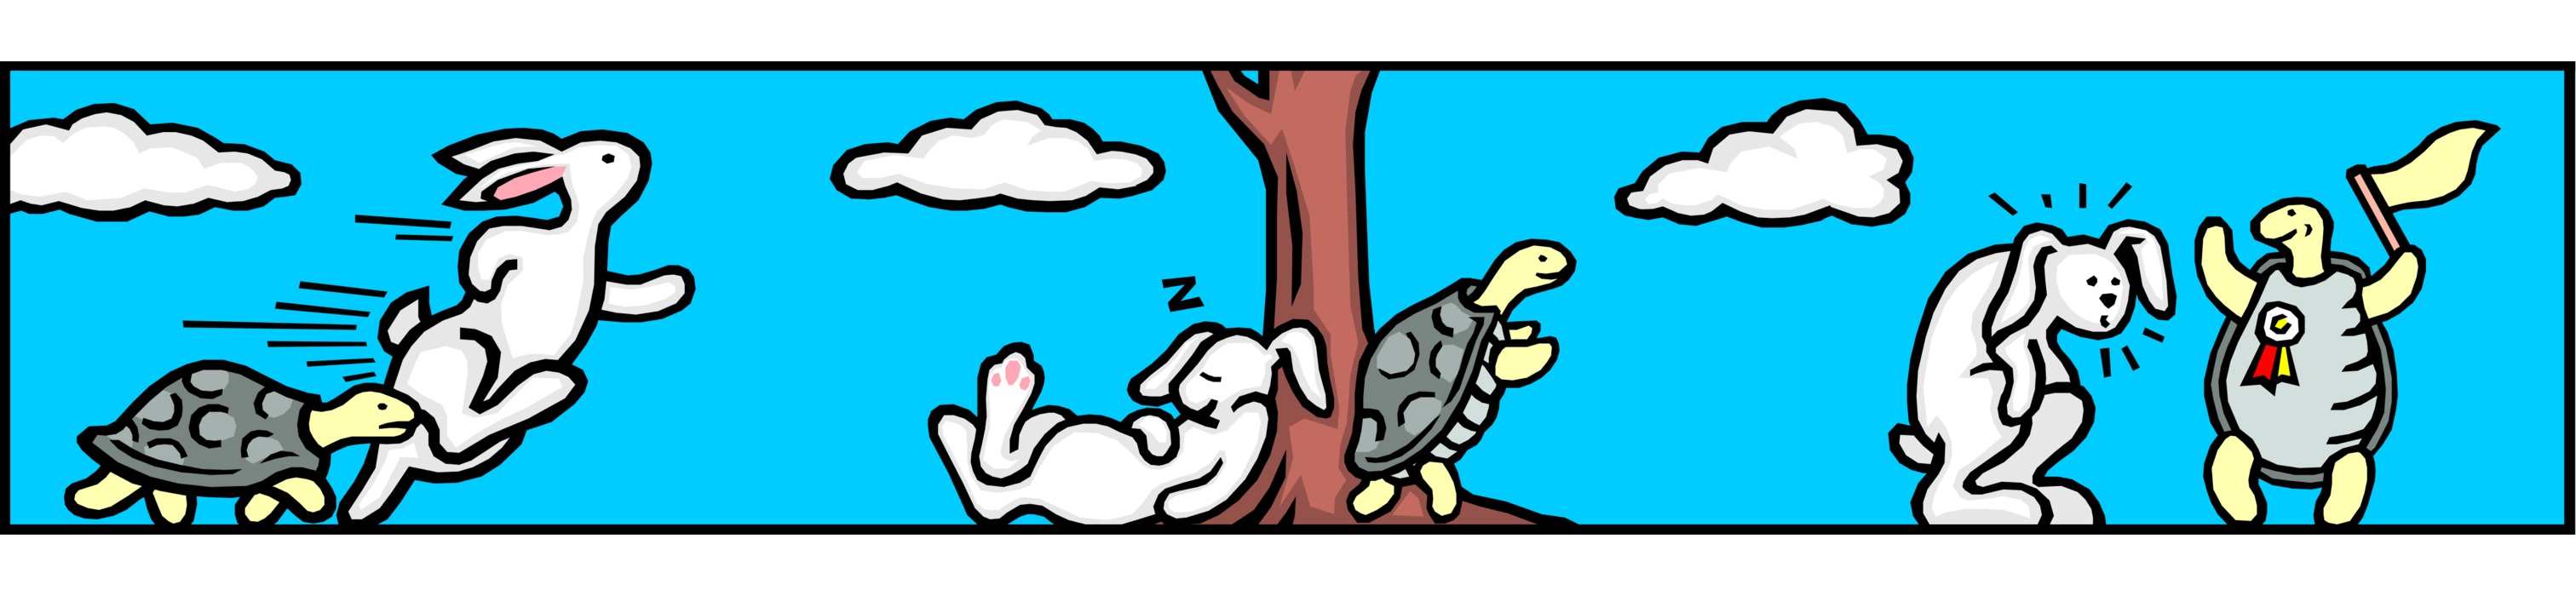 Vector Illustration of The Hare & the Slow-Moving Terrestrial Tortoise or Turtle Race